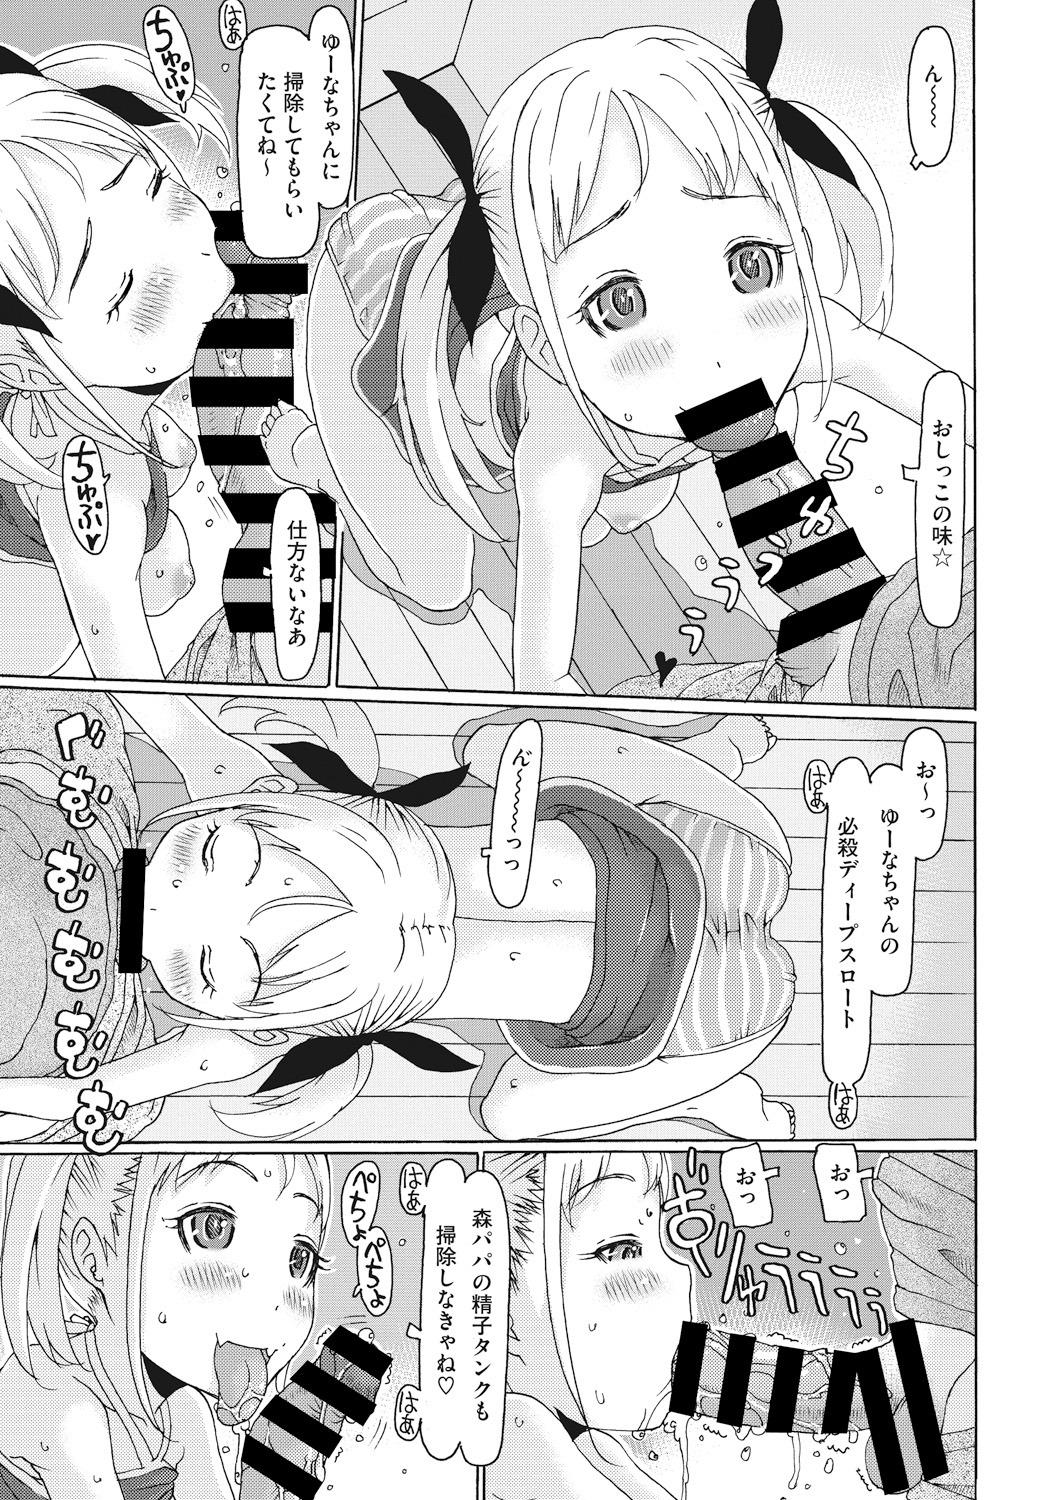 Oil Little Girl Strike Vol. 1 Gapes Gaping Asshole - Page 7